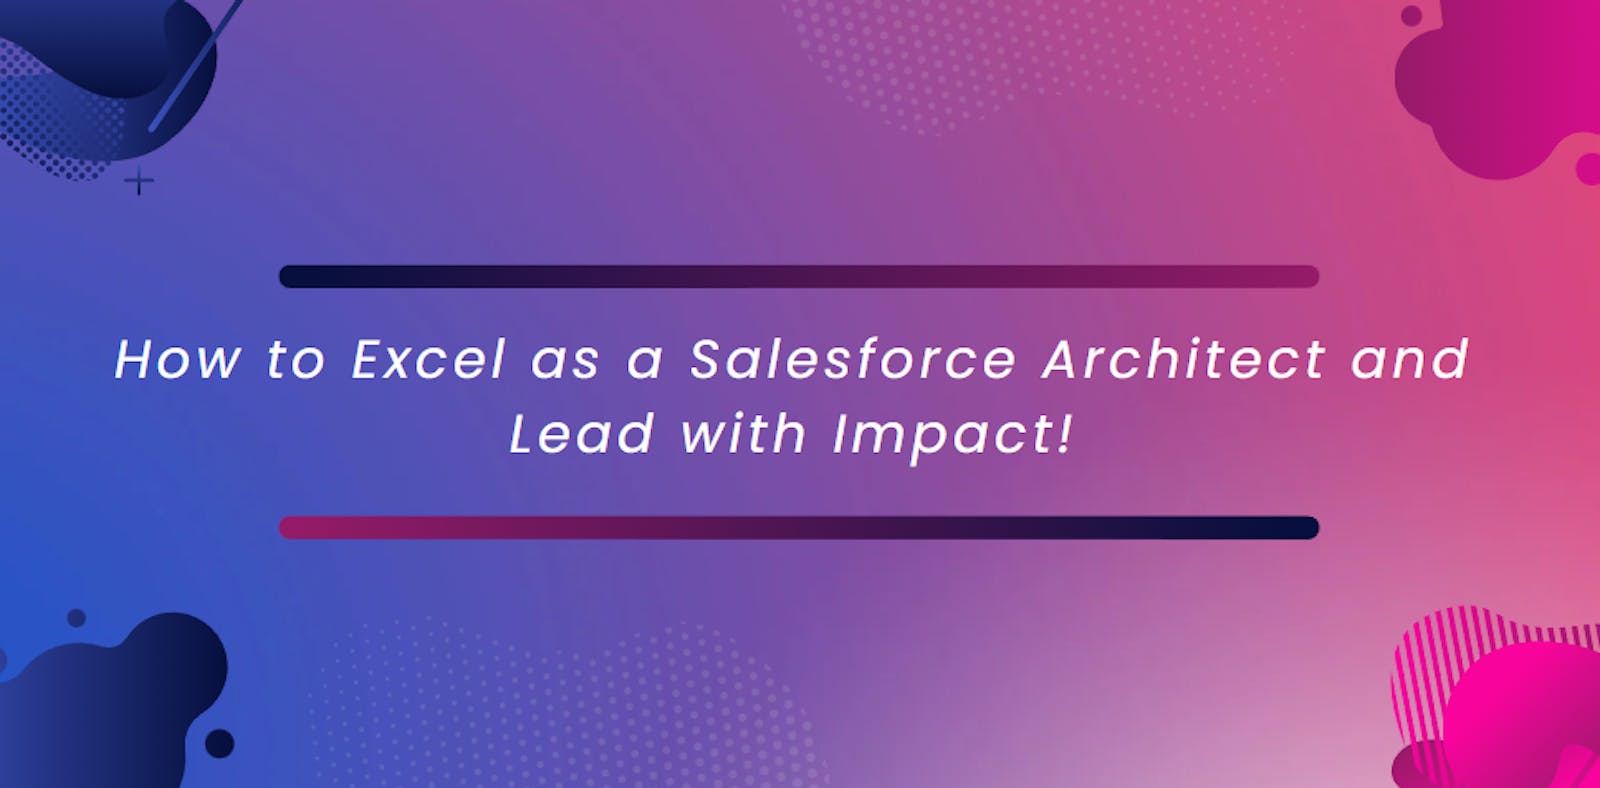 How to Excel as a Salesforce Architect and Lead with Impact!